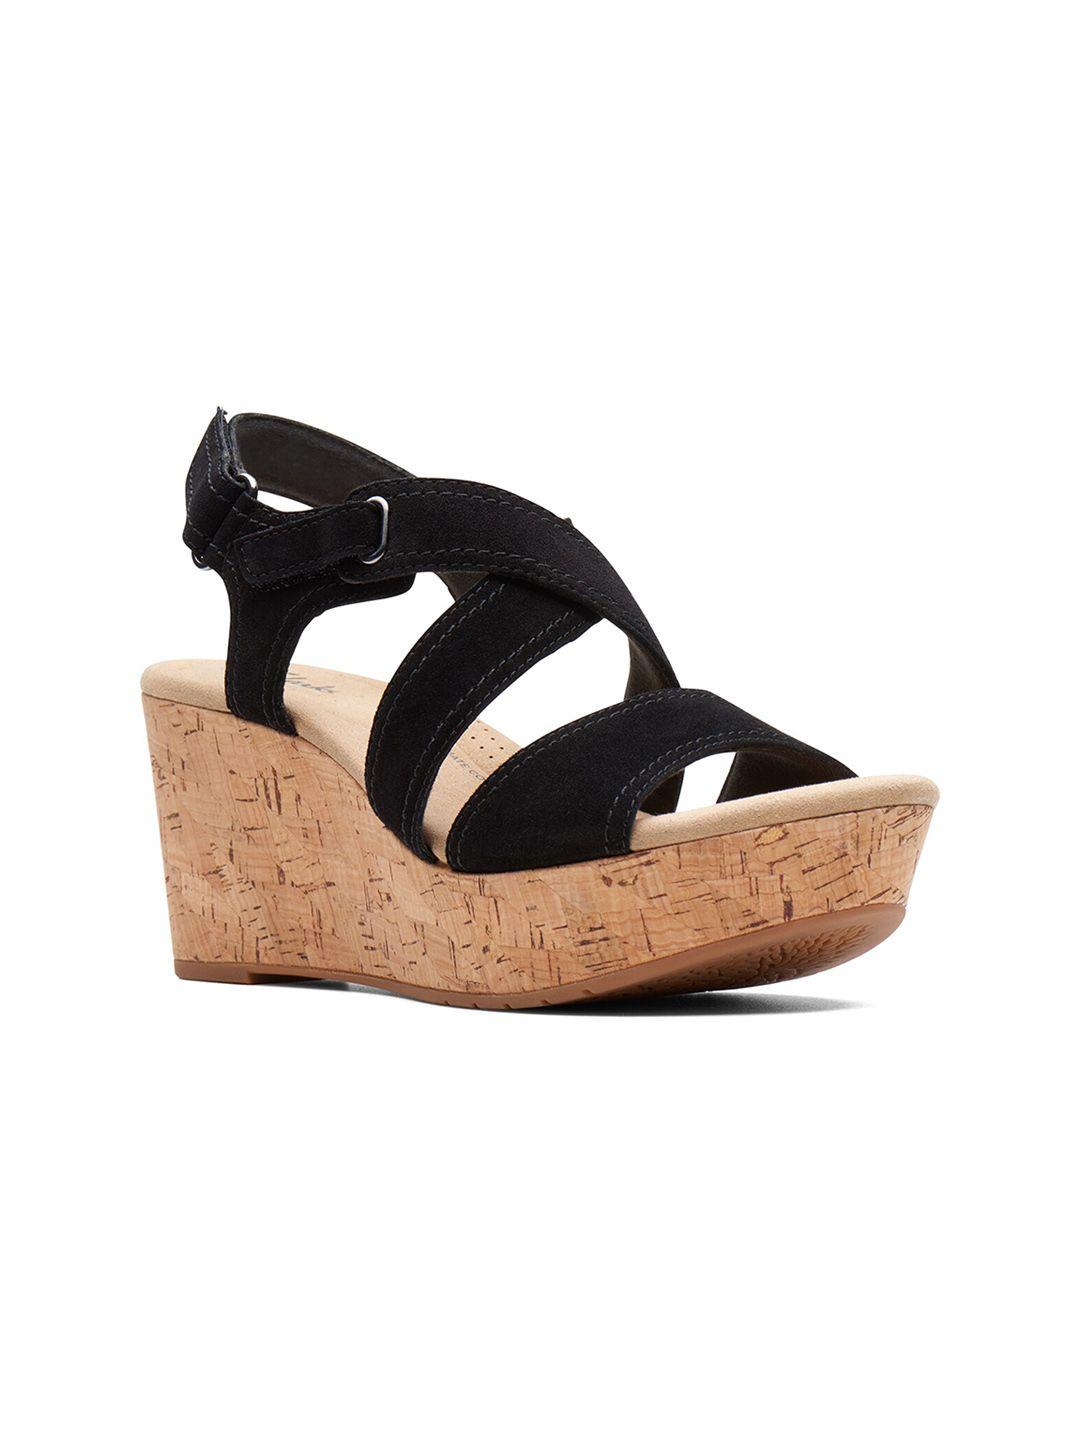 clarks-suede-wedges-with-buckles